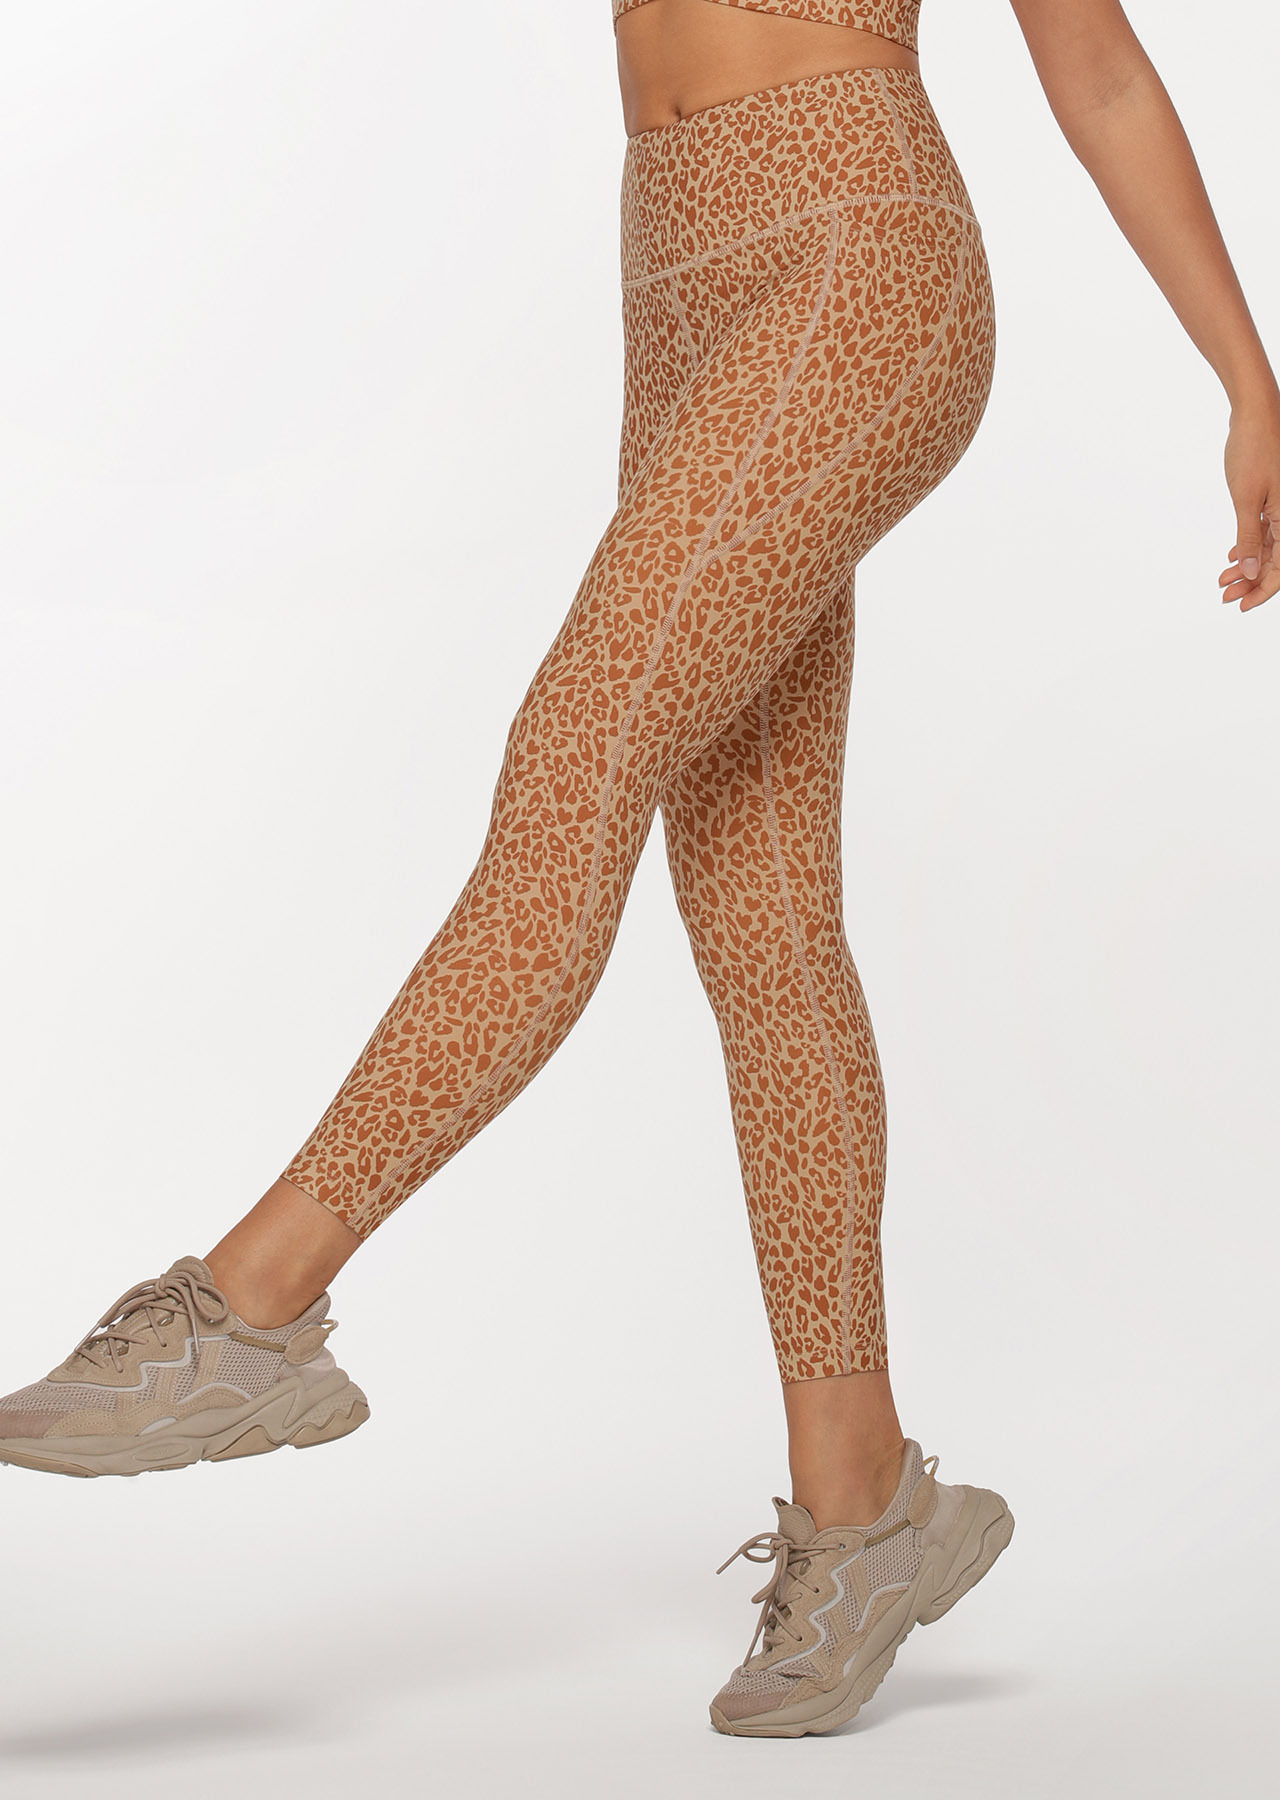 Athleisure Weekend Butterfly Cut Out Ankle-Length Leggings-sonthuy.vn